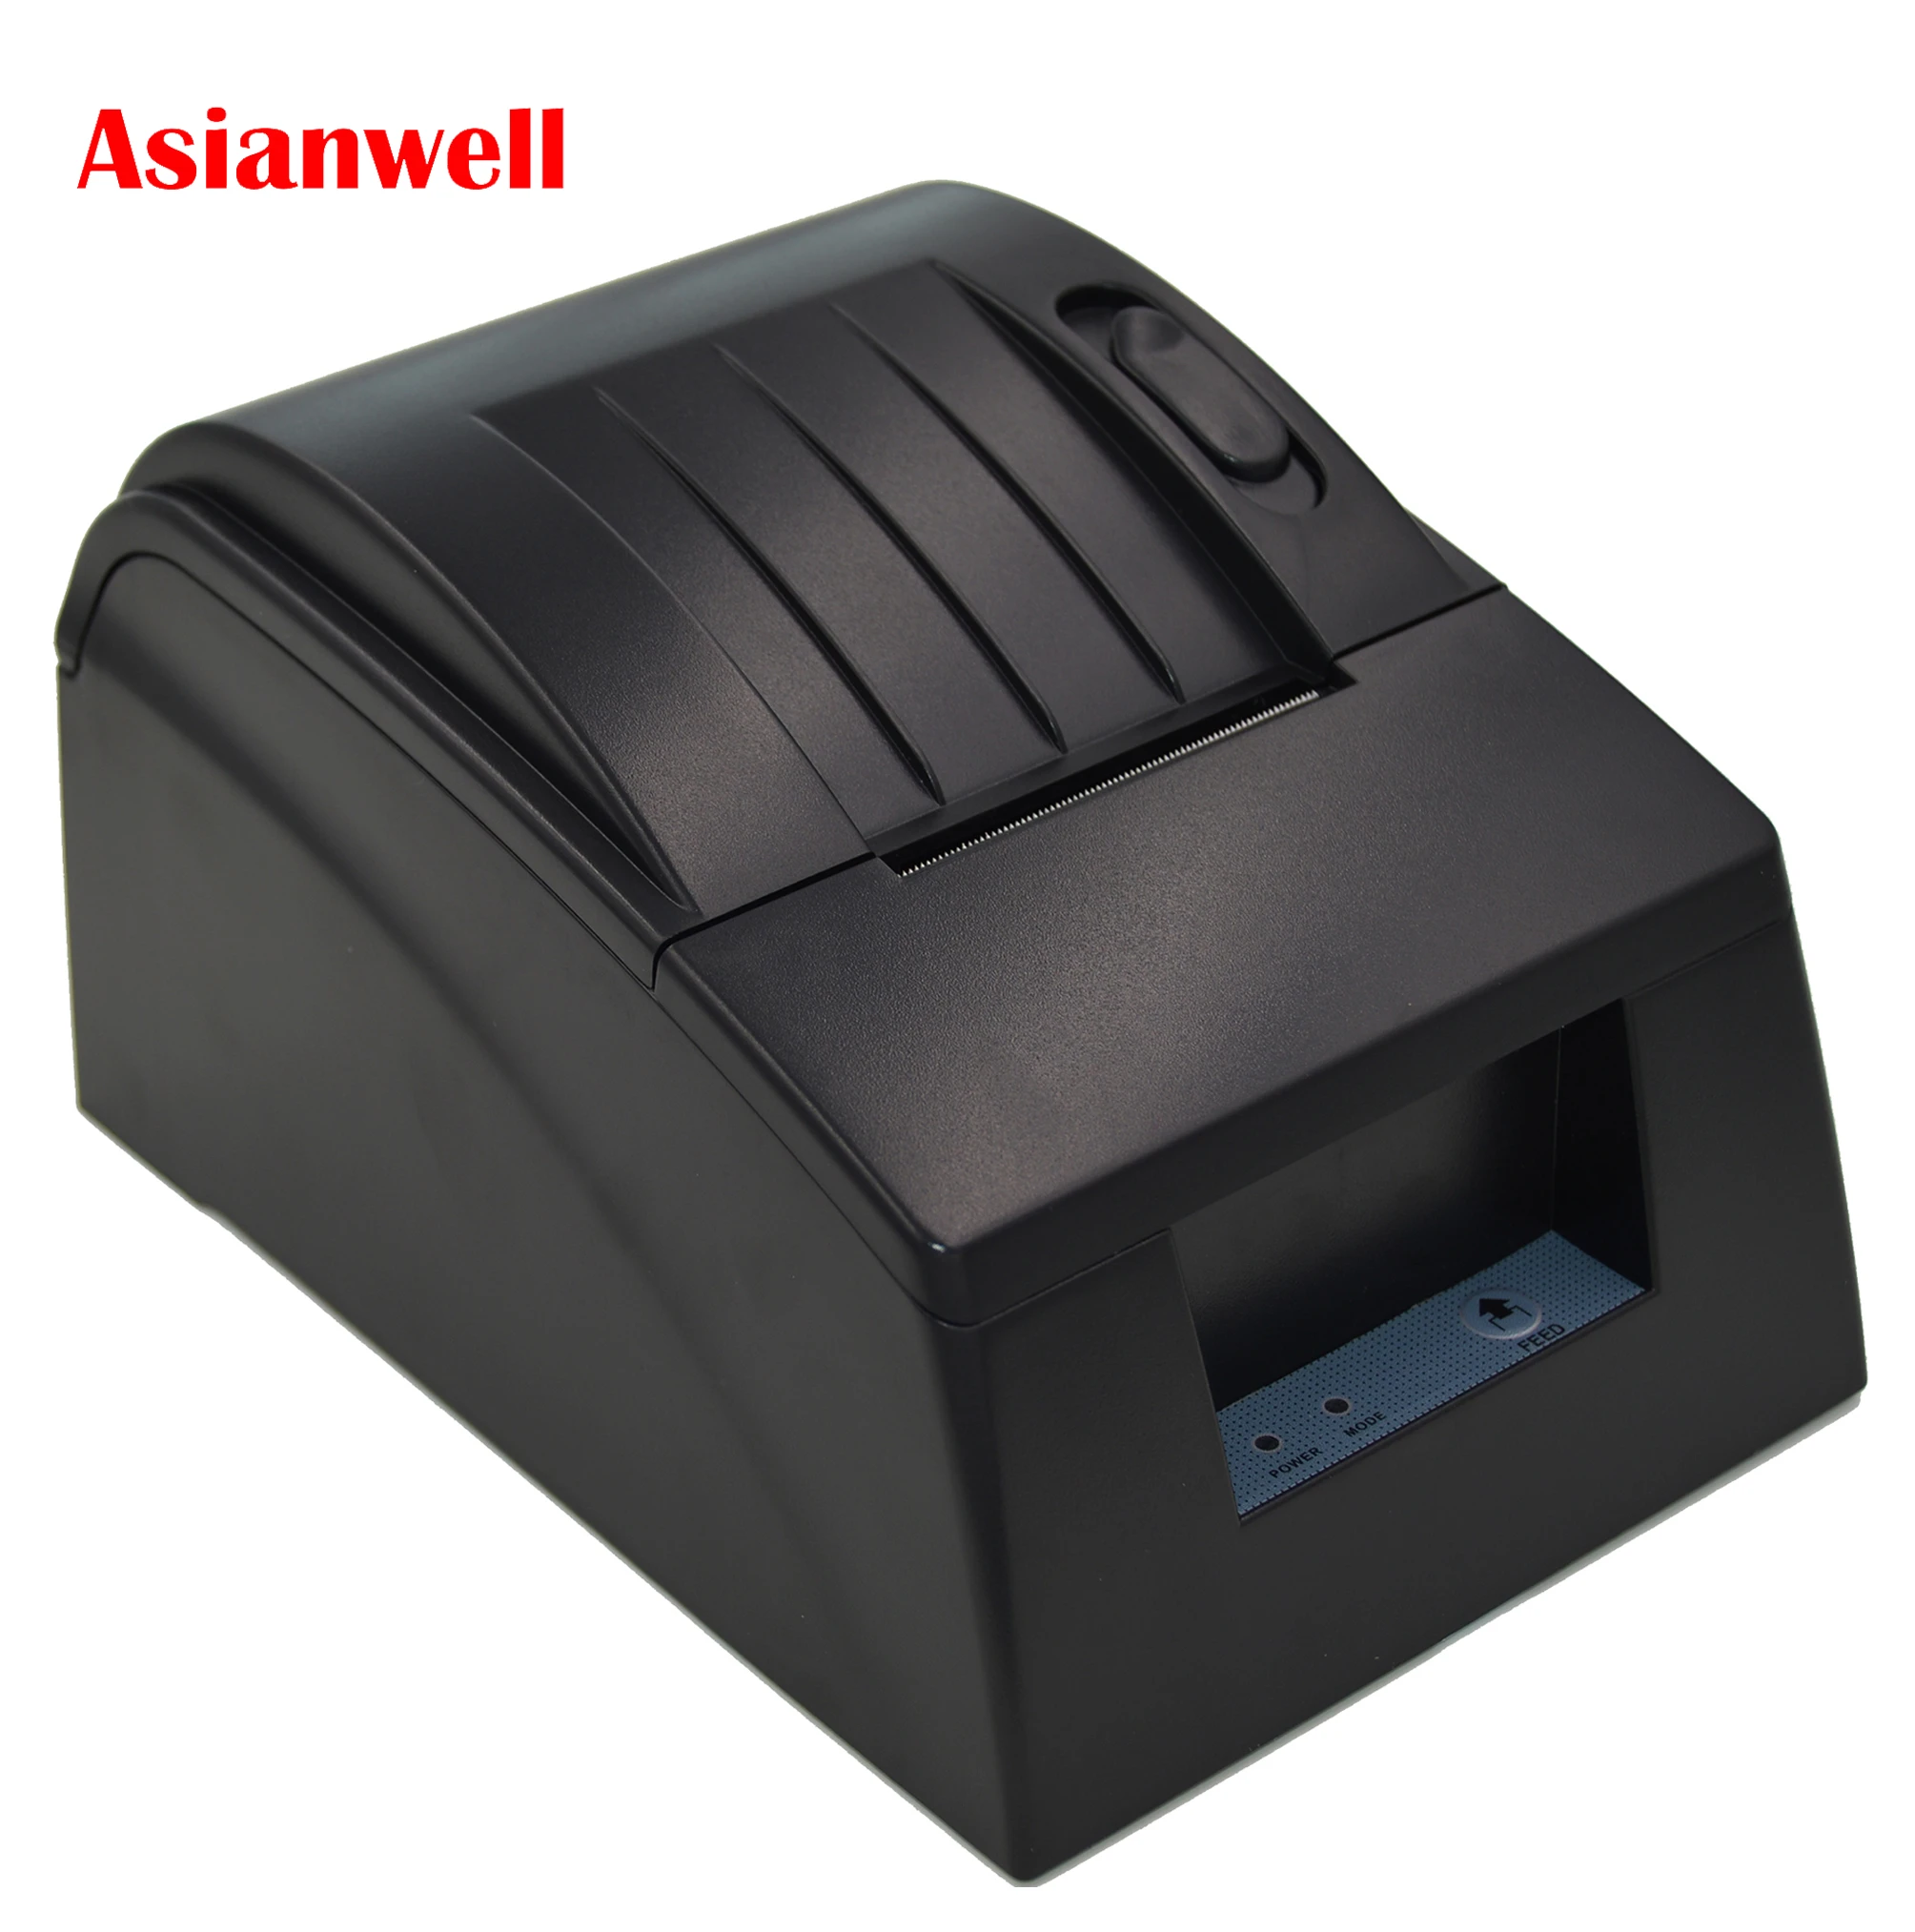 AW-5890G fast print speed 58mm thermal direct receipt printer with USB port